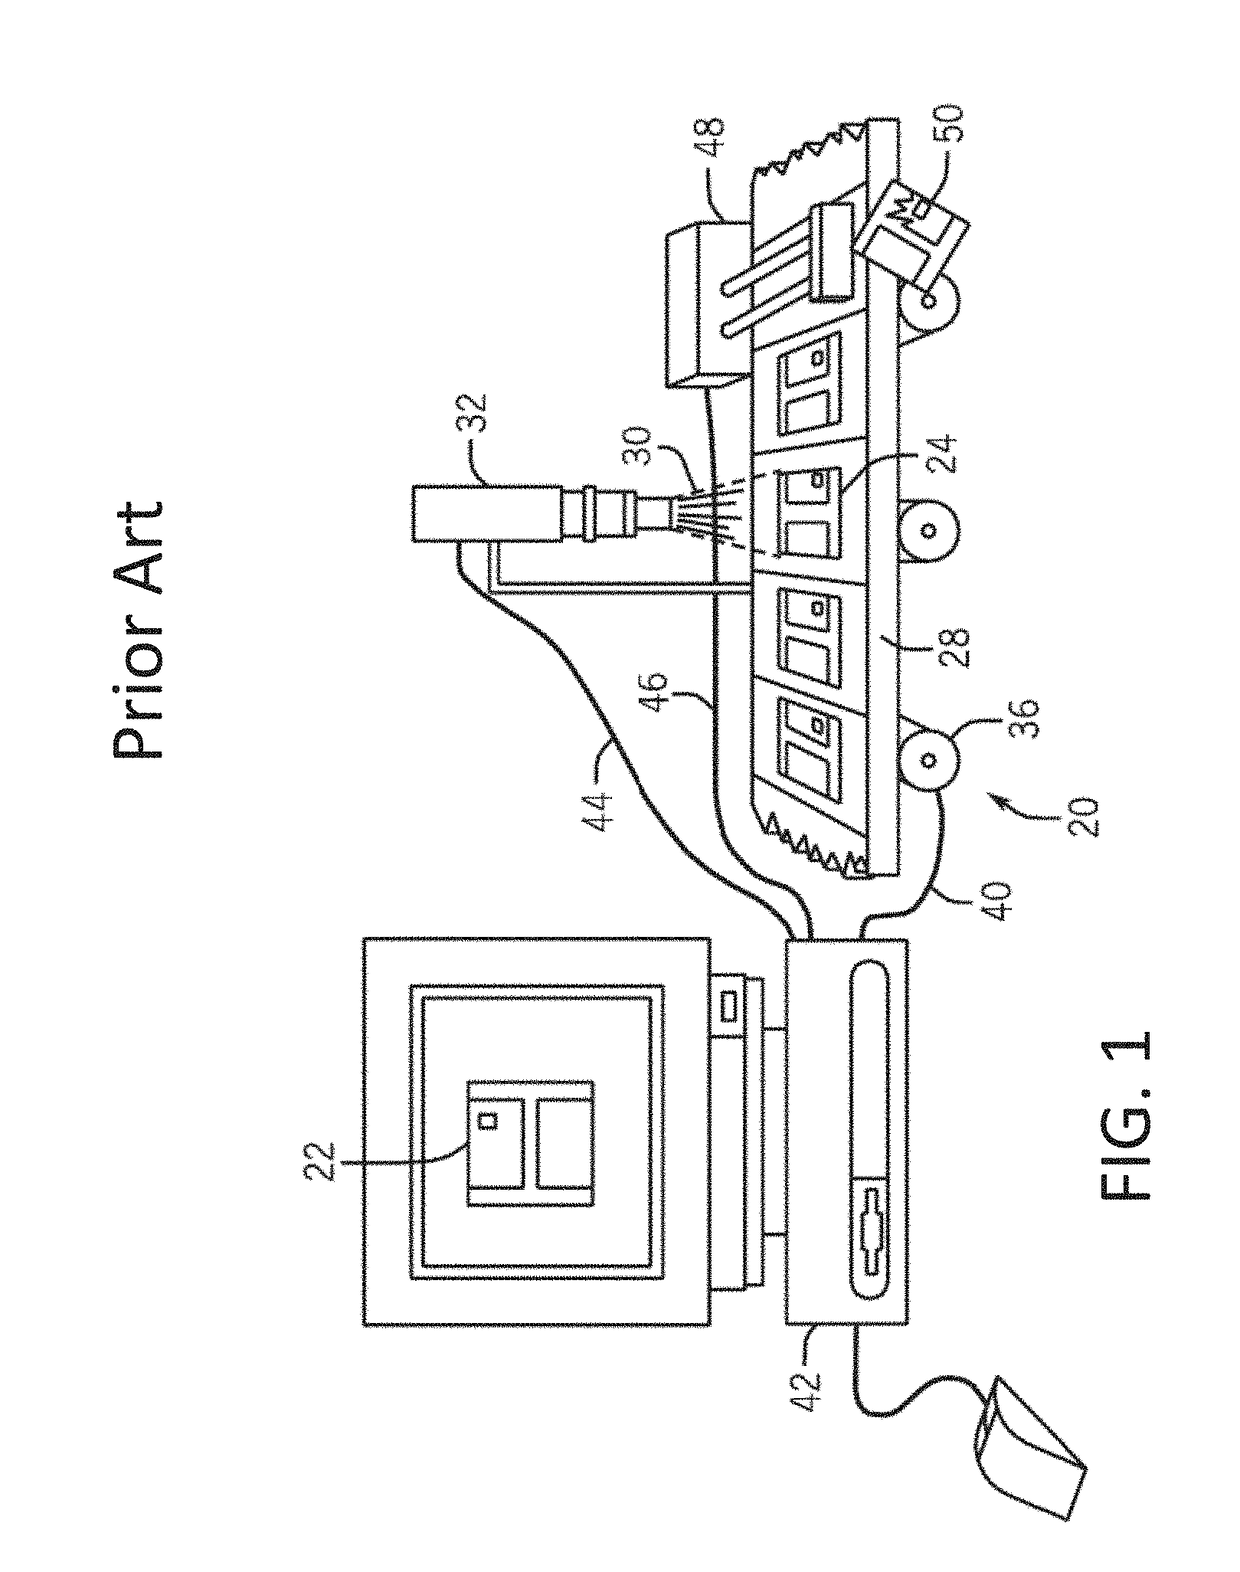 Machine vision systems and methods with predictive motion control